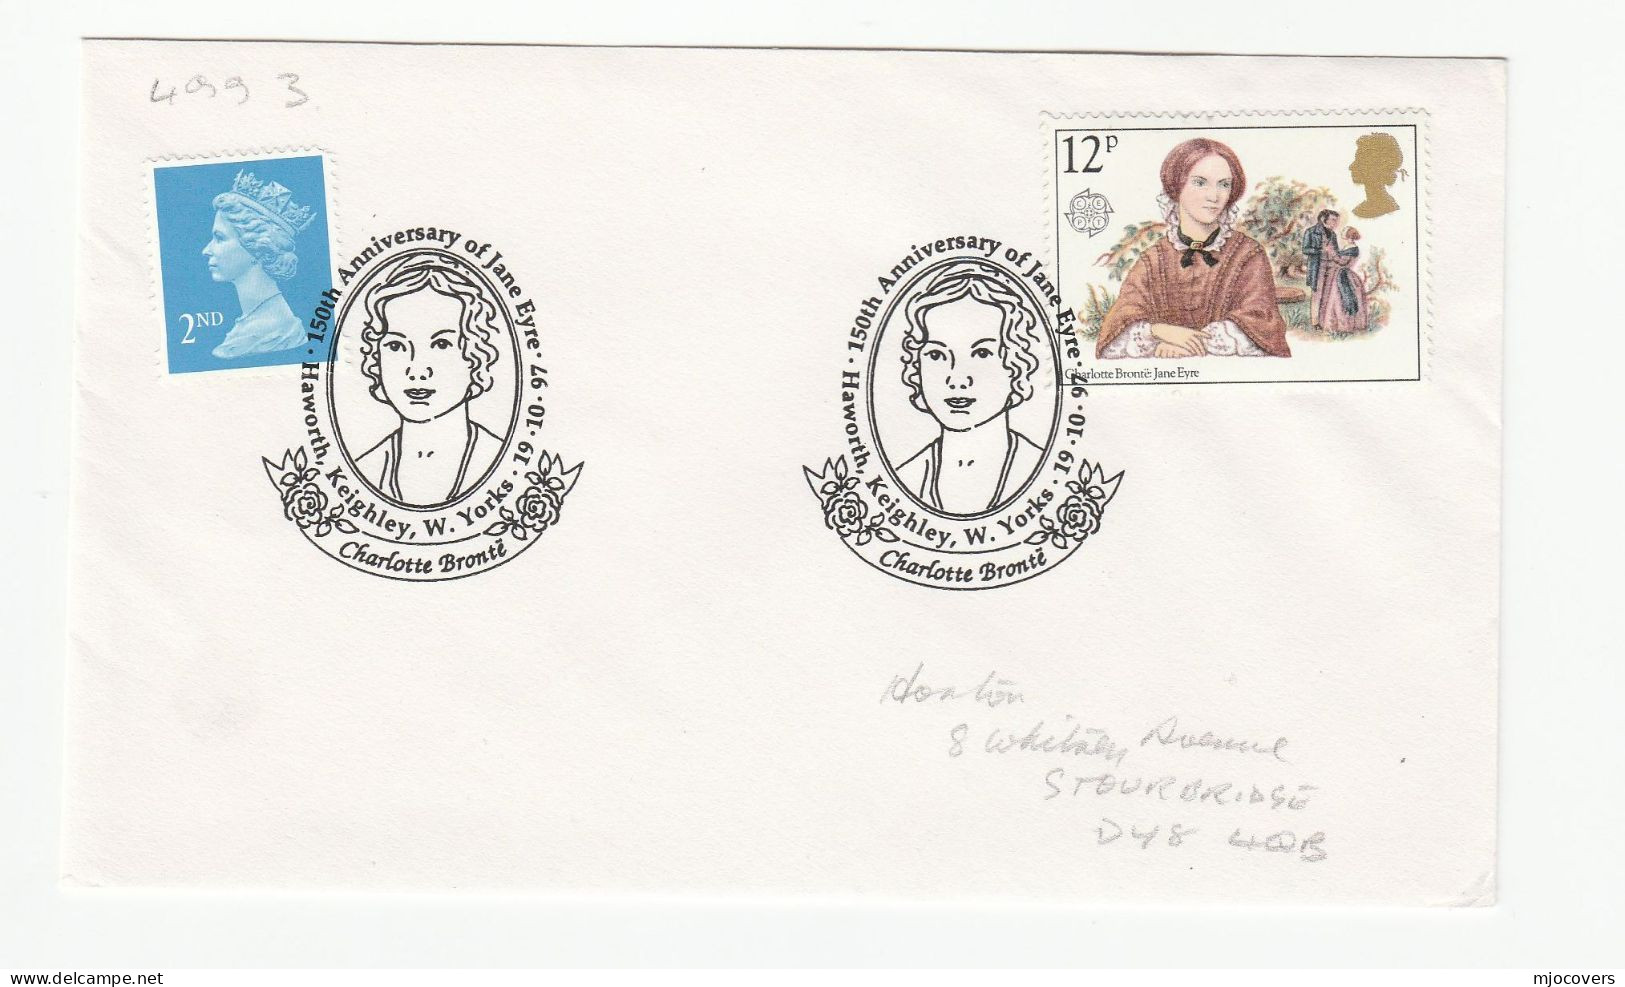 Cover JANE EYRE Novel  150th Anniv Haworth Keighley GB Charlotte BRONTE Fdc  Stamps Literature Rose Flower Roses 1997 - Beroemde Vrouwen